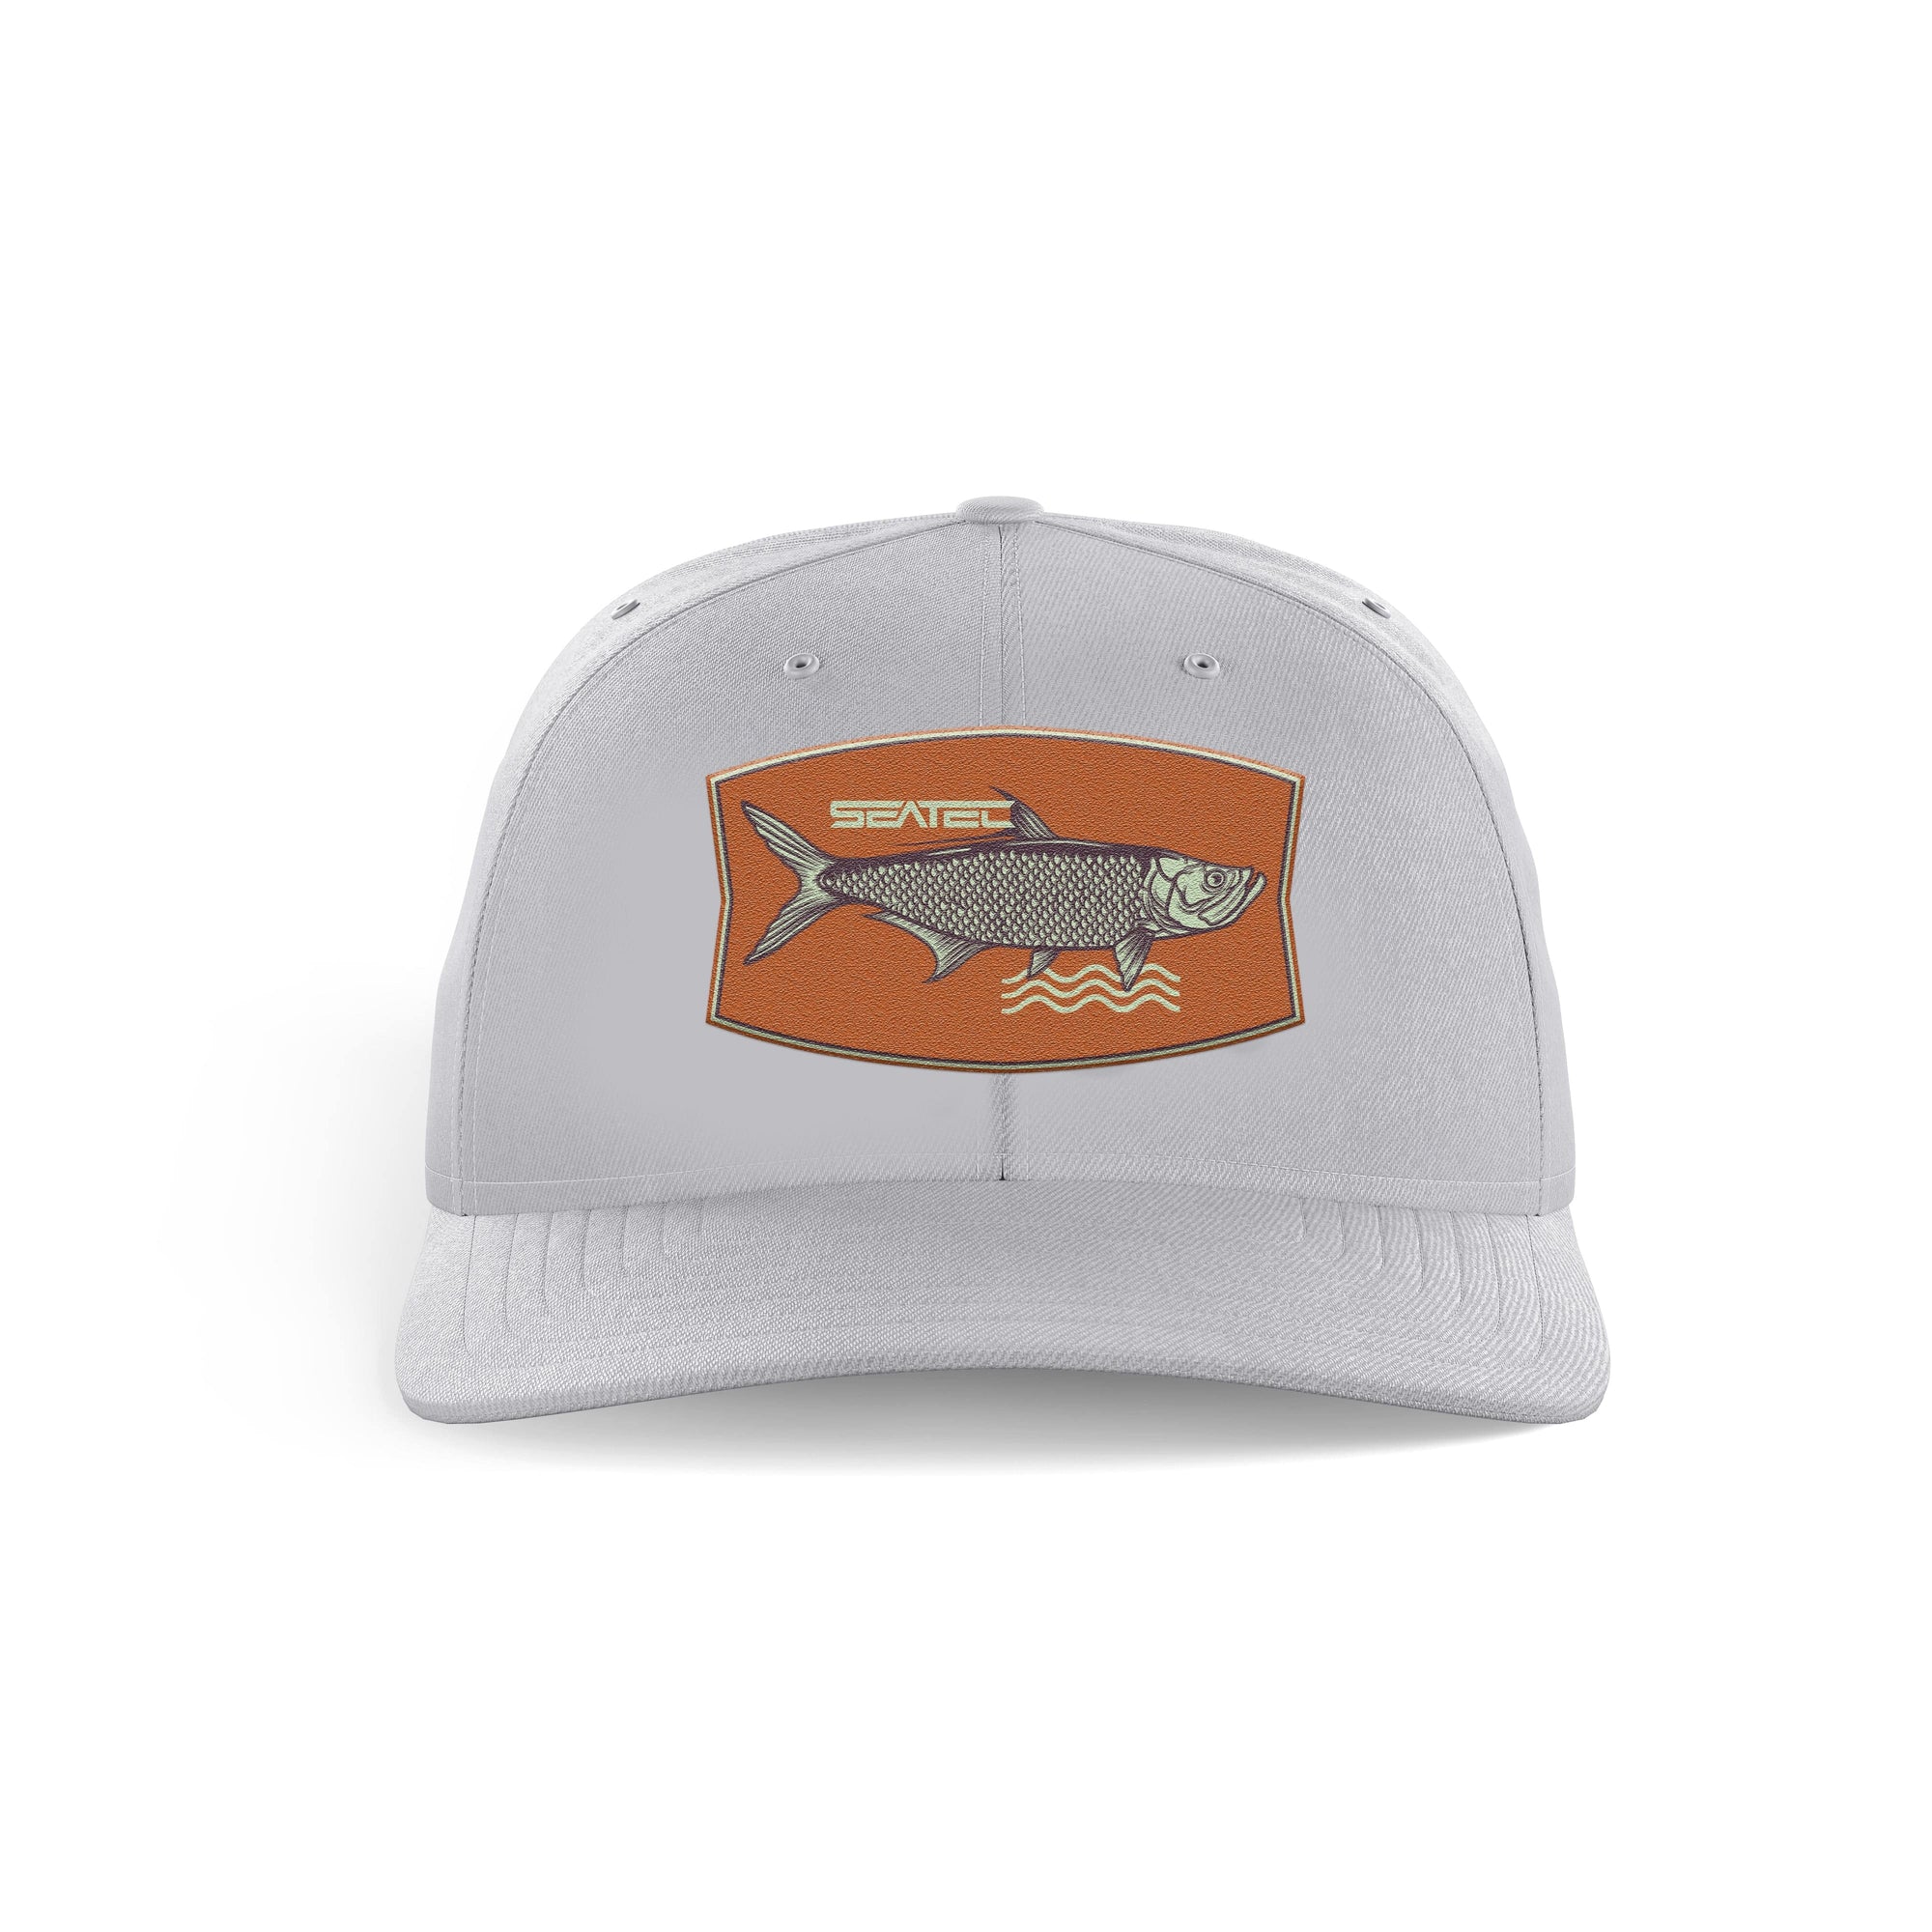 Seatec Outfitters Hats TARPON PATCH | TWILL TRUCKER